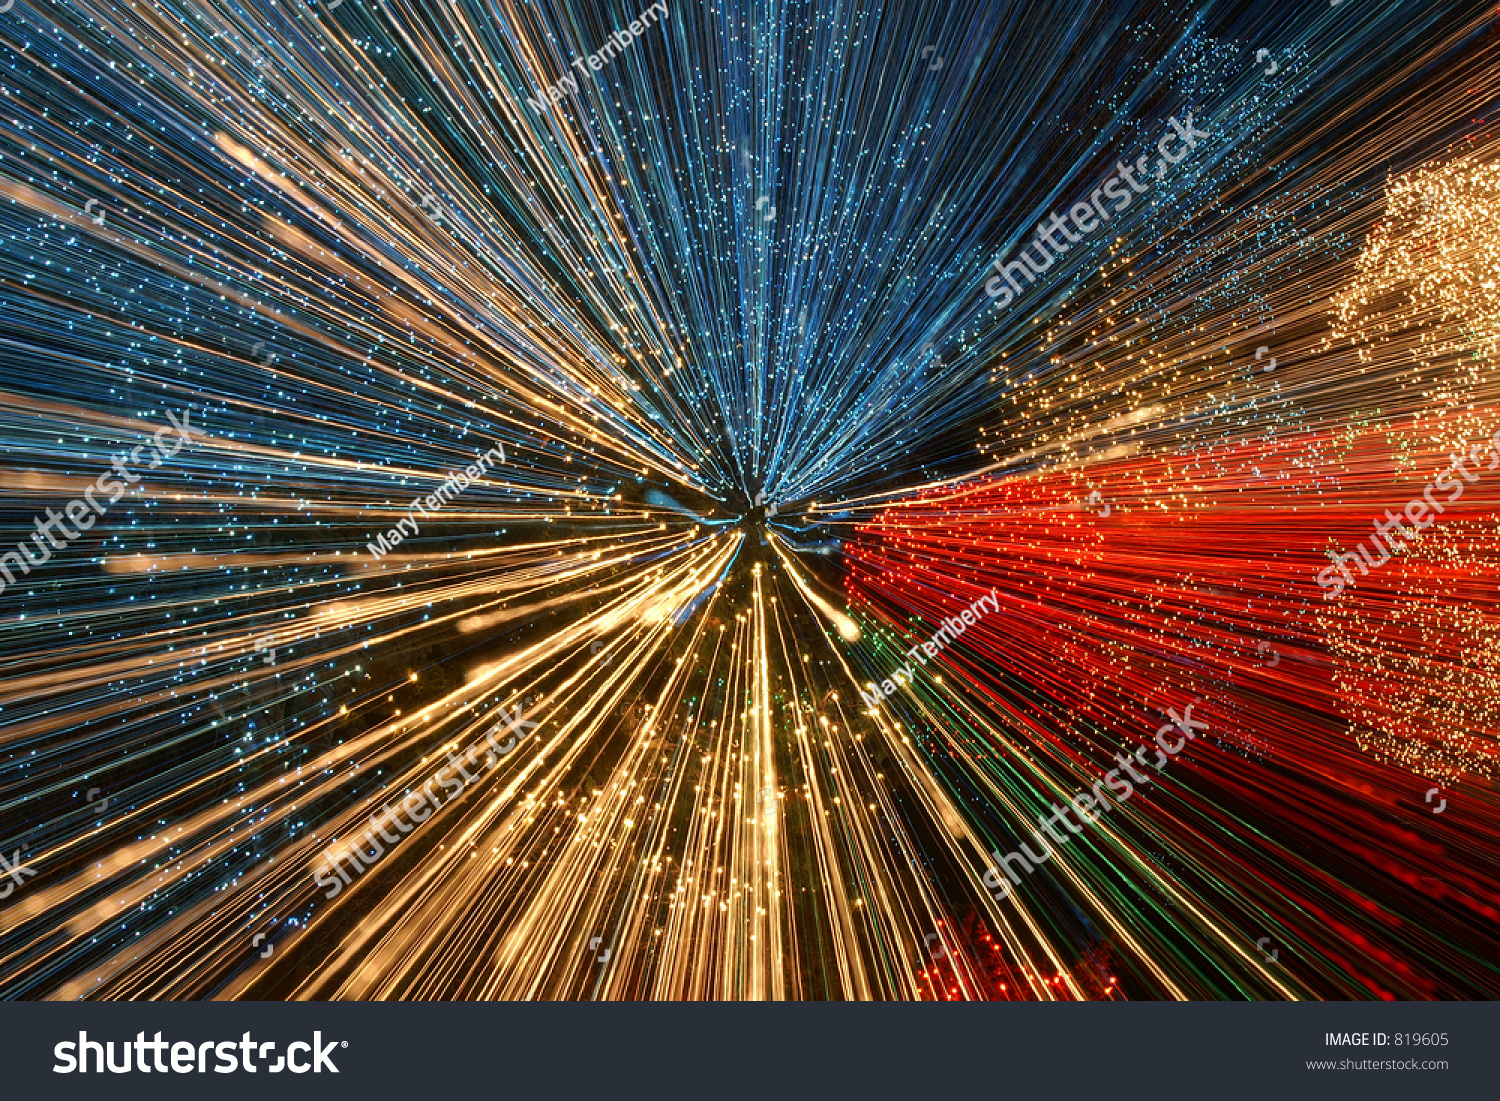 Christmas Lights Zooming During Slow Shutter Speed Stock Photo 819605 : Shutterstock